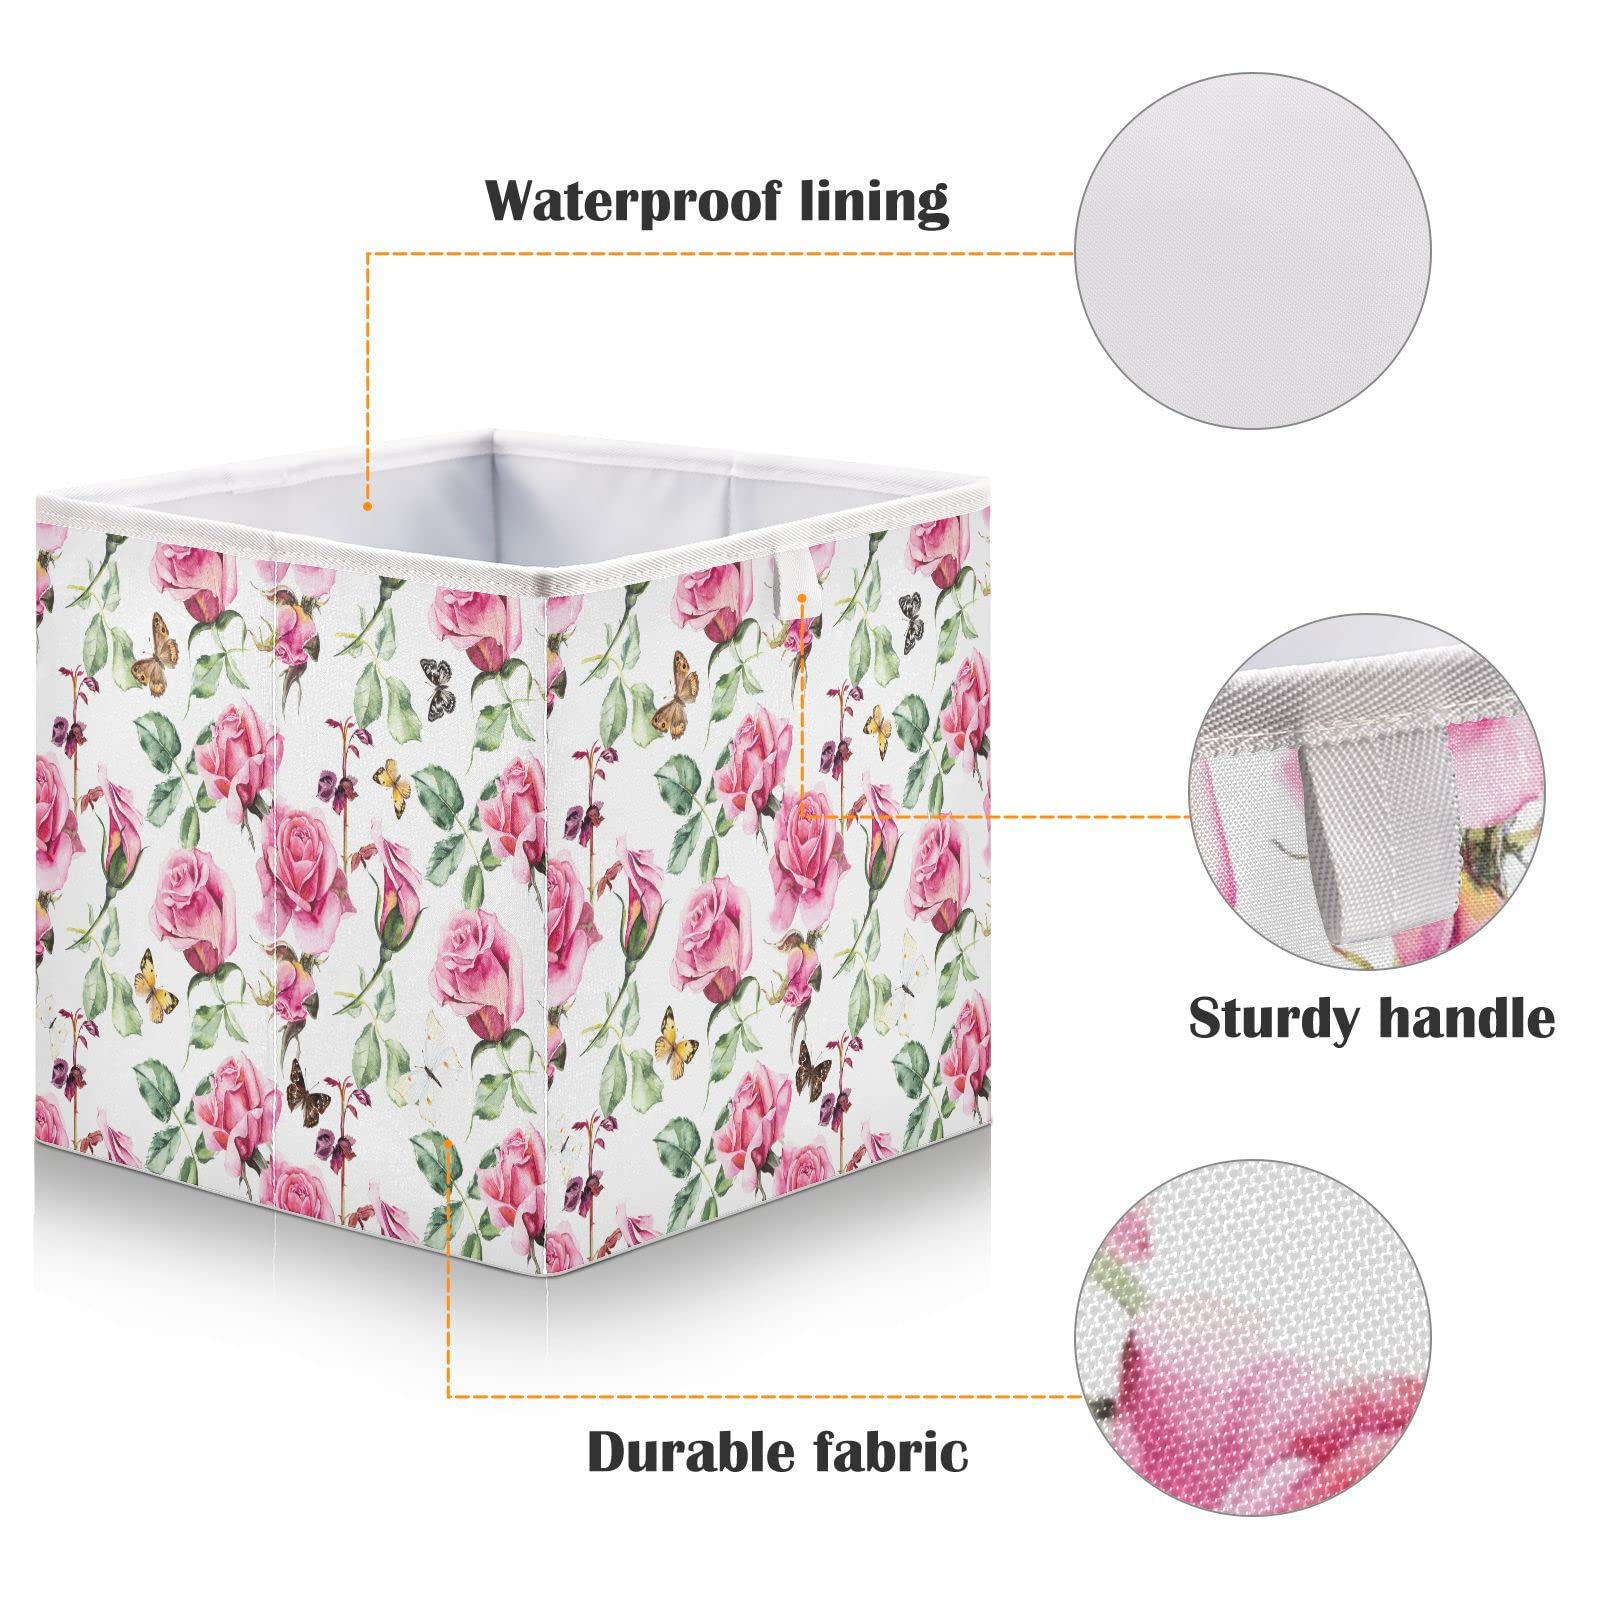 Kigai Rose Butterfly Cube Storage Bin, 11x11x11 in Collapsible Fabric Storage Cubes Organizer Portable Storage Baskets for Shelves, Closets, Laundry, Nursery, Home Decor